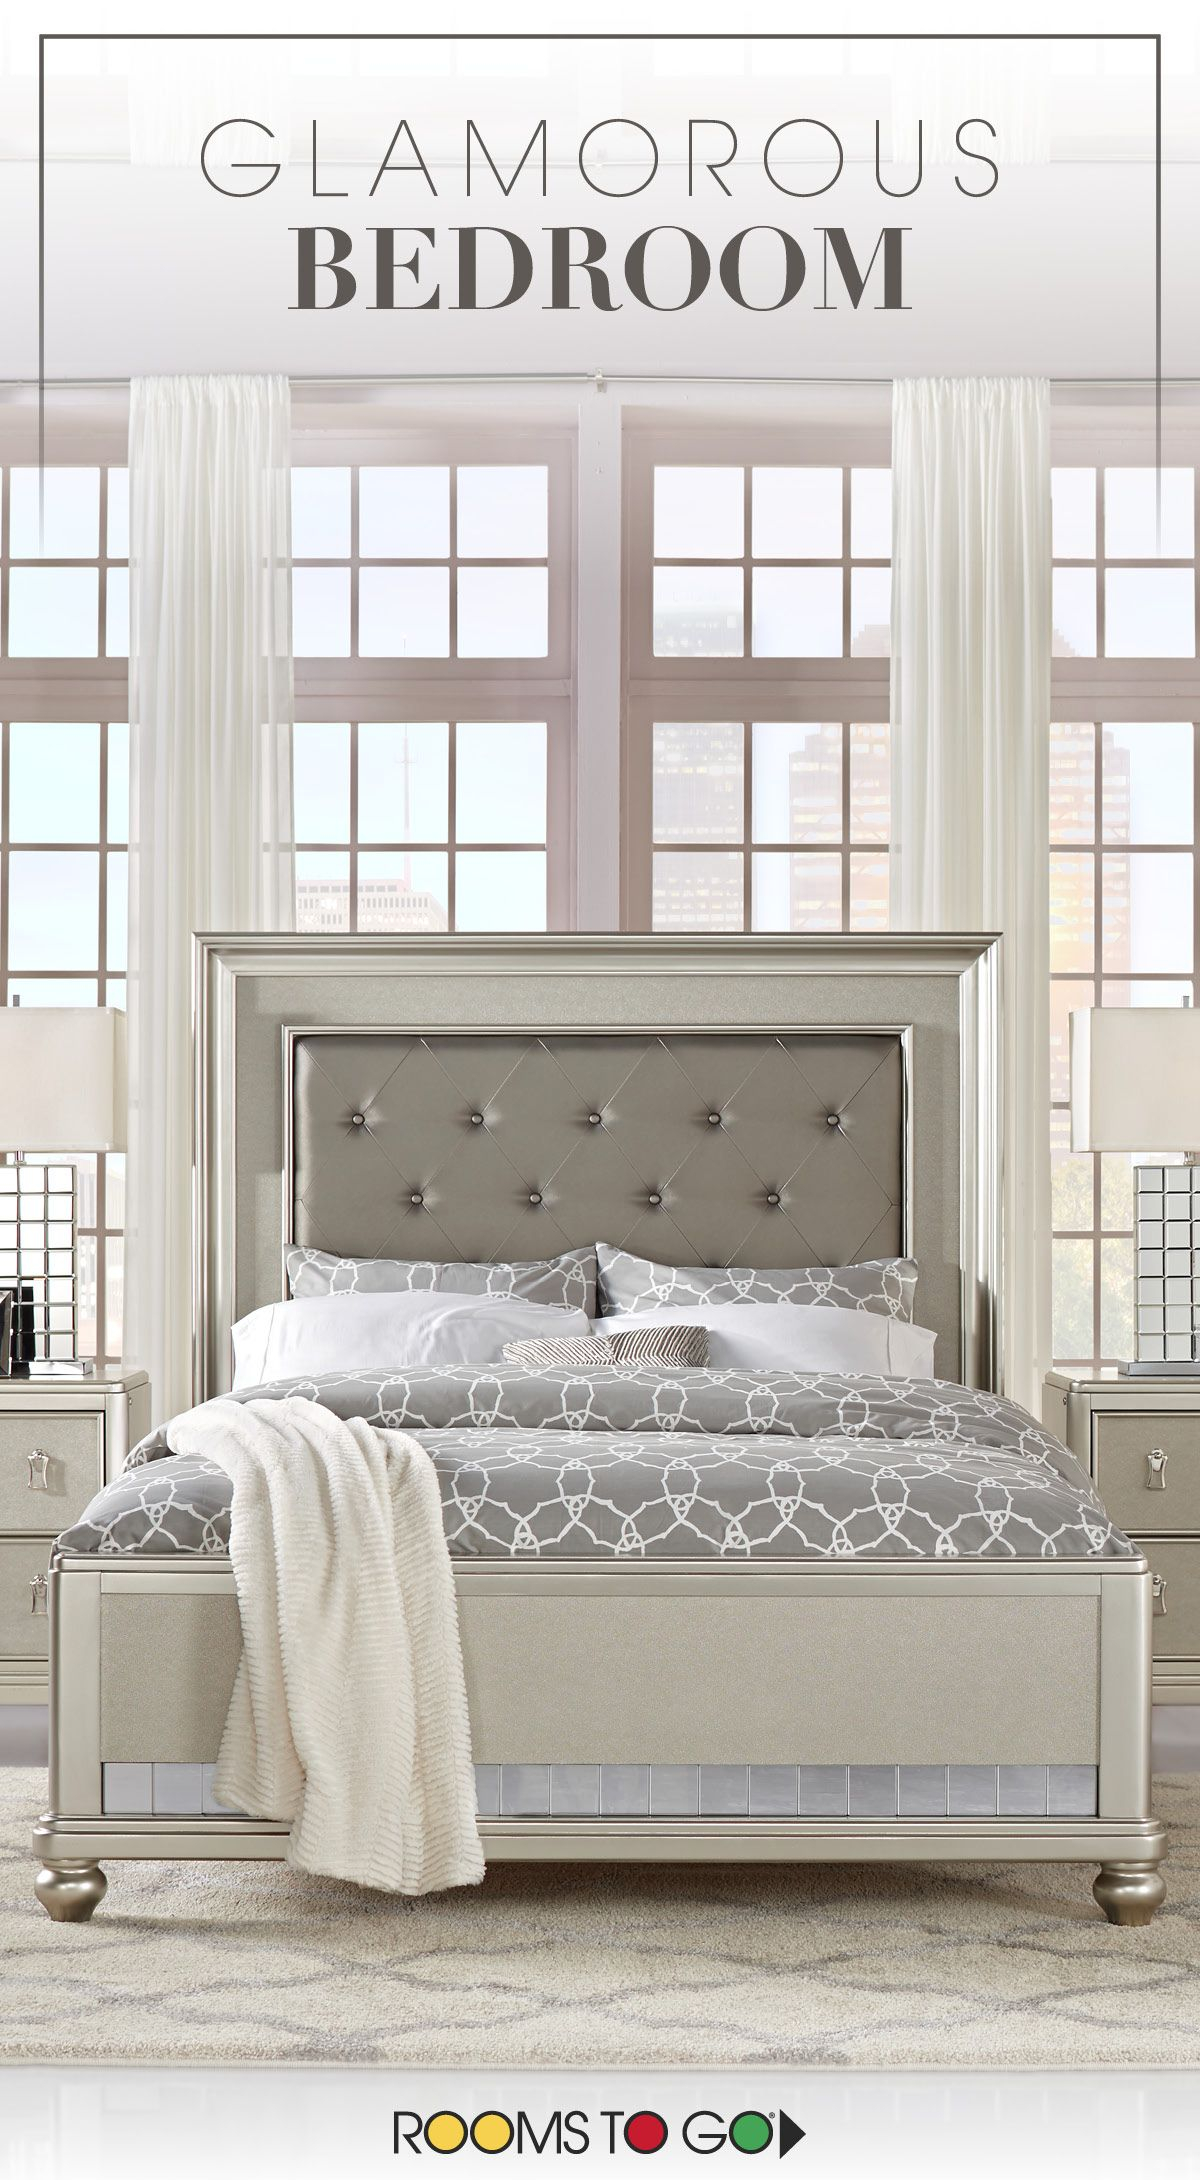 Sofia Vergara Paris Silver 5 Pc King Bedroom Dreamy Bedrooms intended for size 1200 X 2180